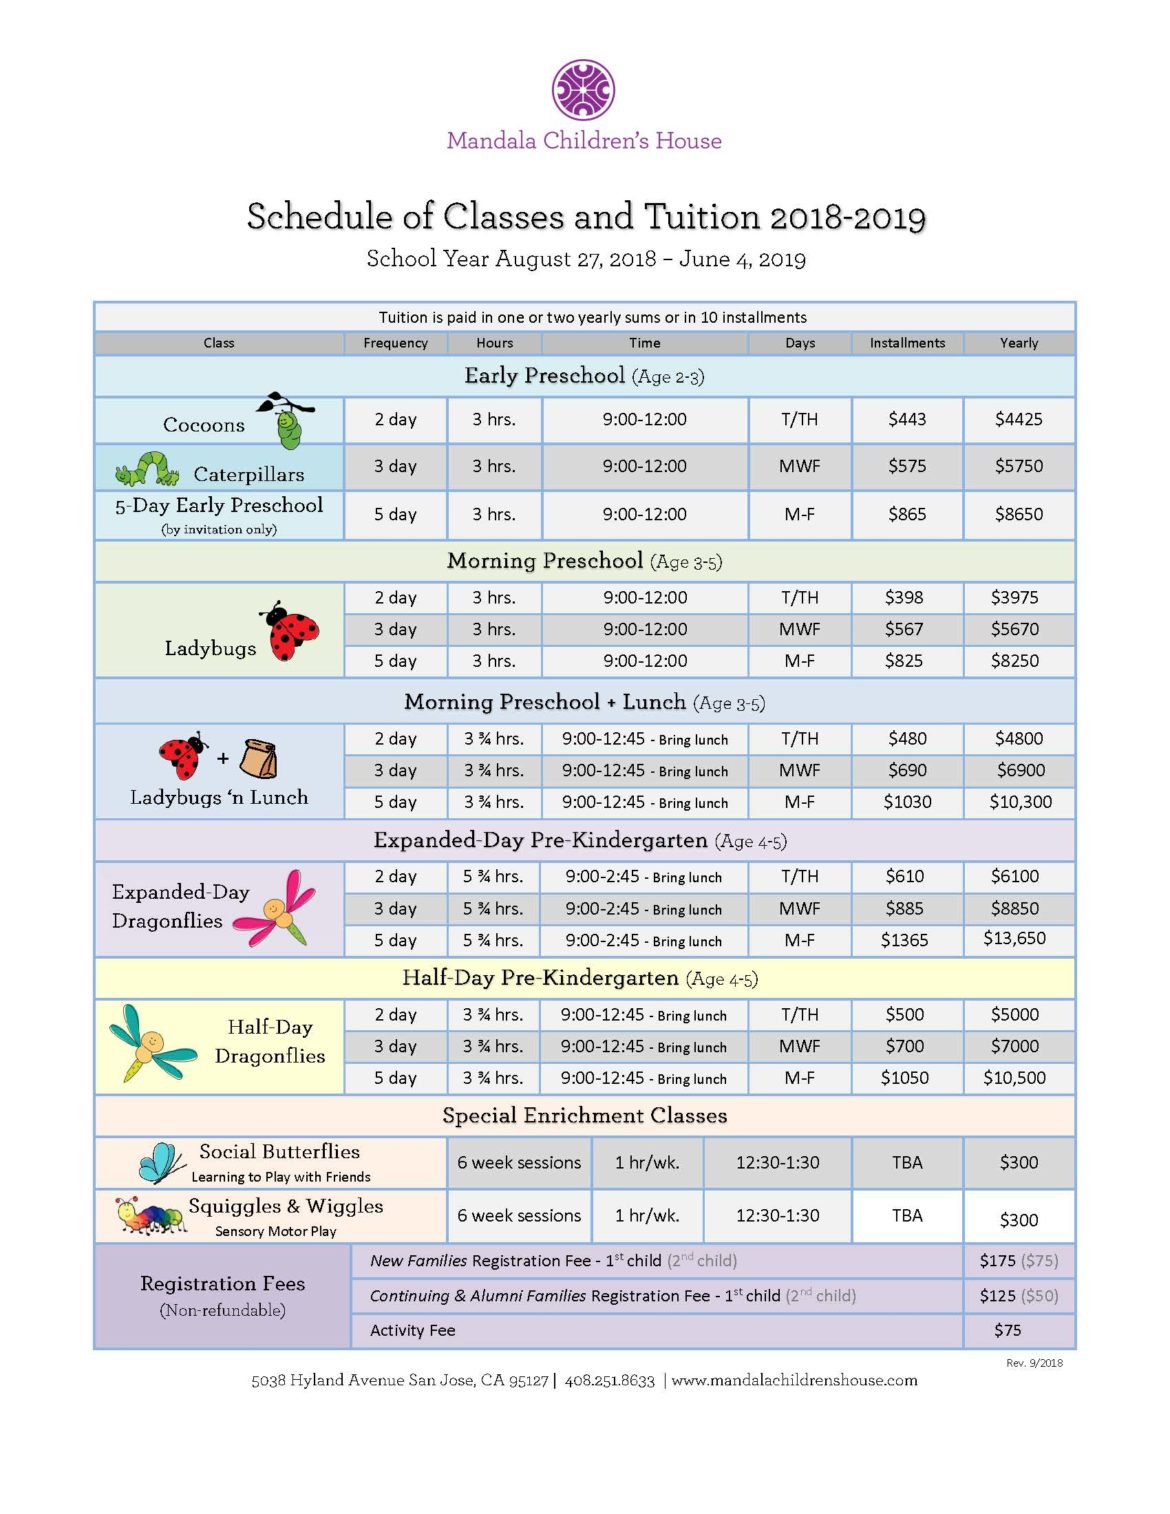 Schedule-of-Classes-Tuition-2018-19-revised-website-2.jpg